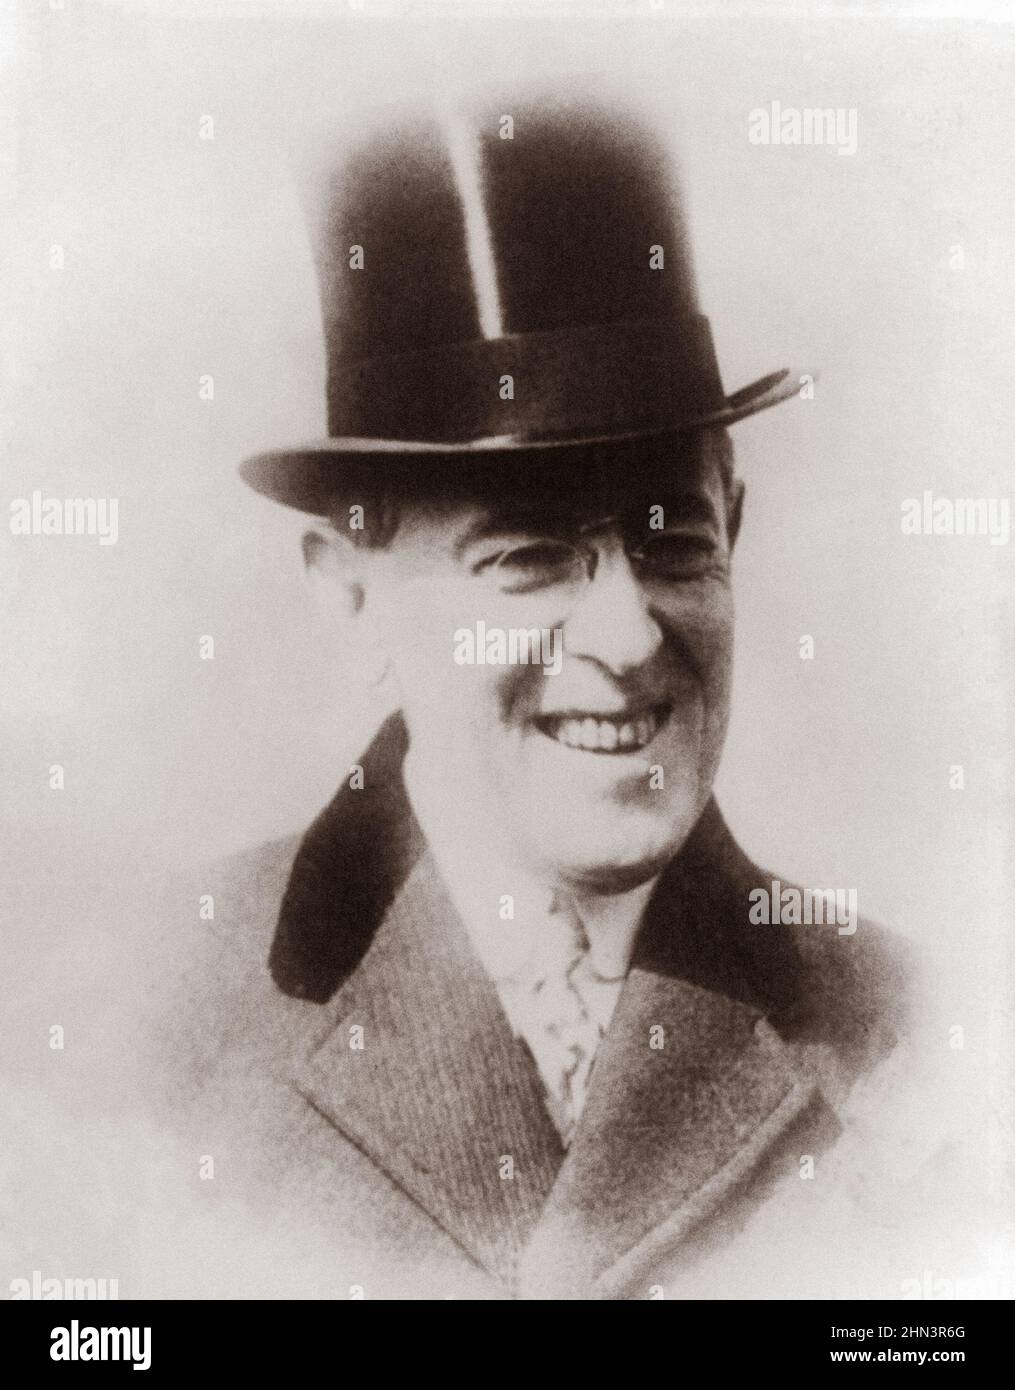 Portrait of President Woodrow Wilson. 1912 Thomas Woodrow Wilson (1856 – 1924) was an American politician and academic who served as the 28th presiden Stock Photo